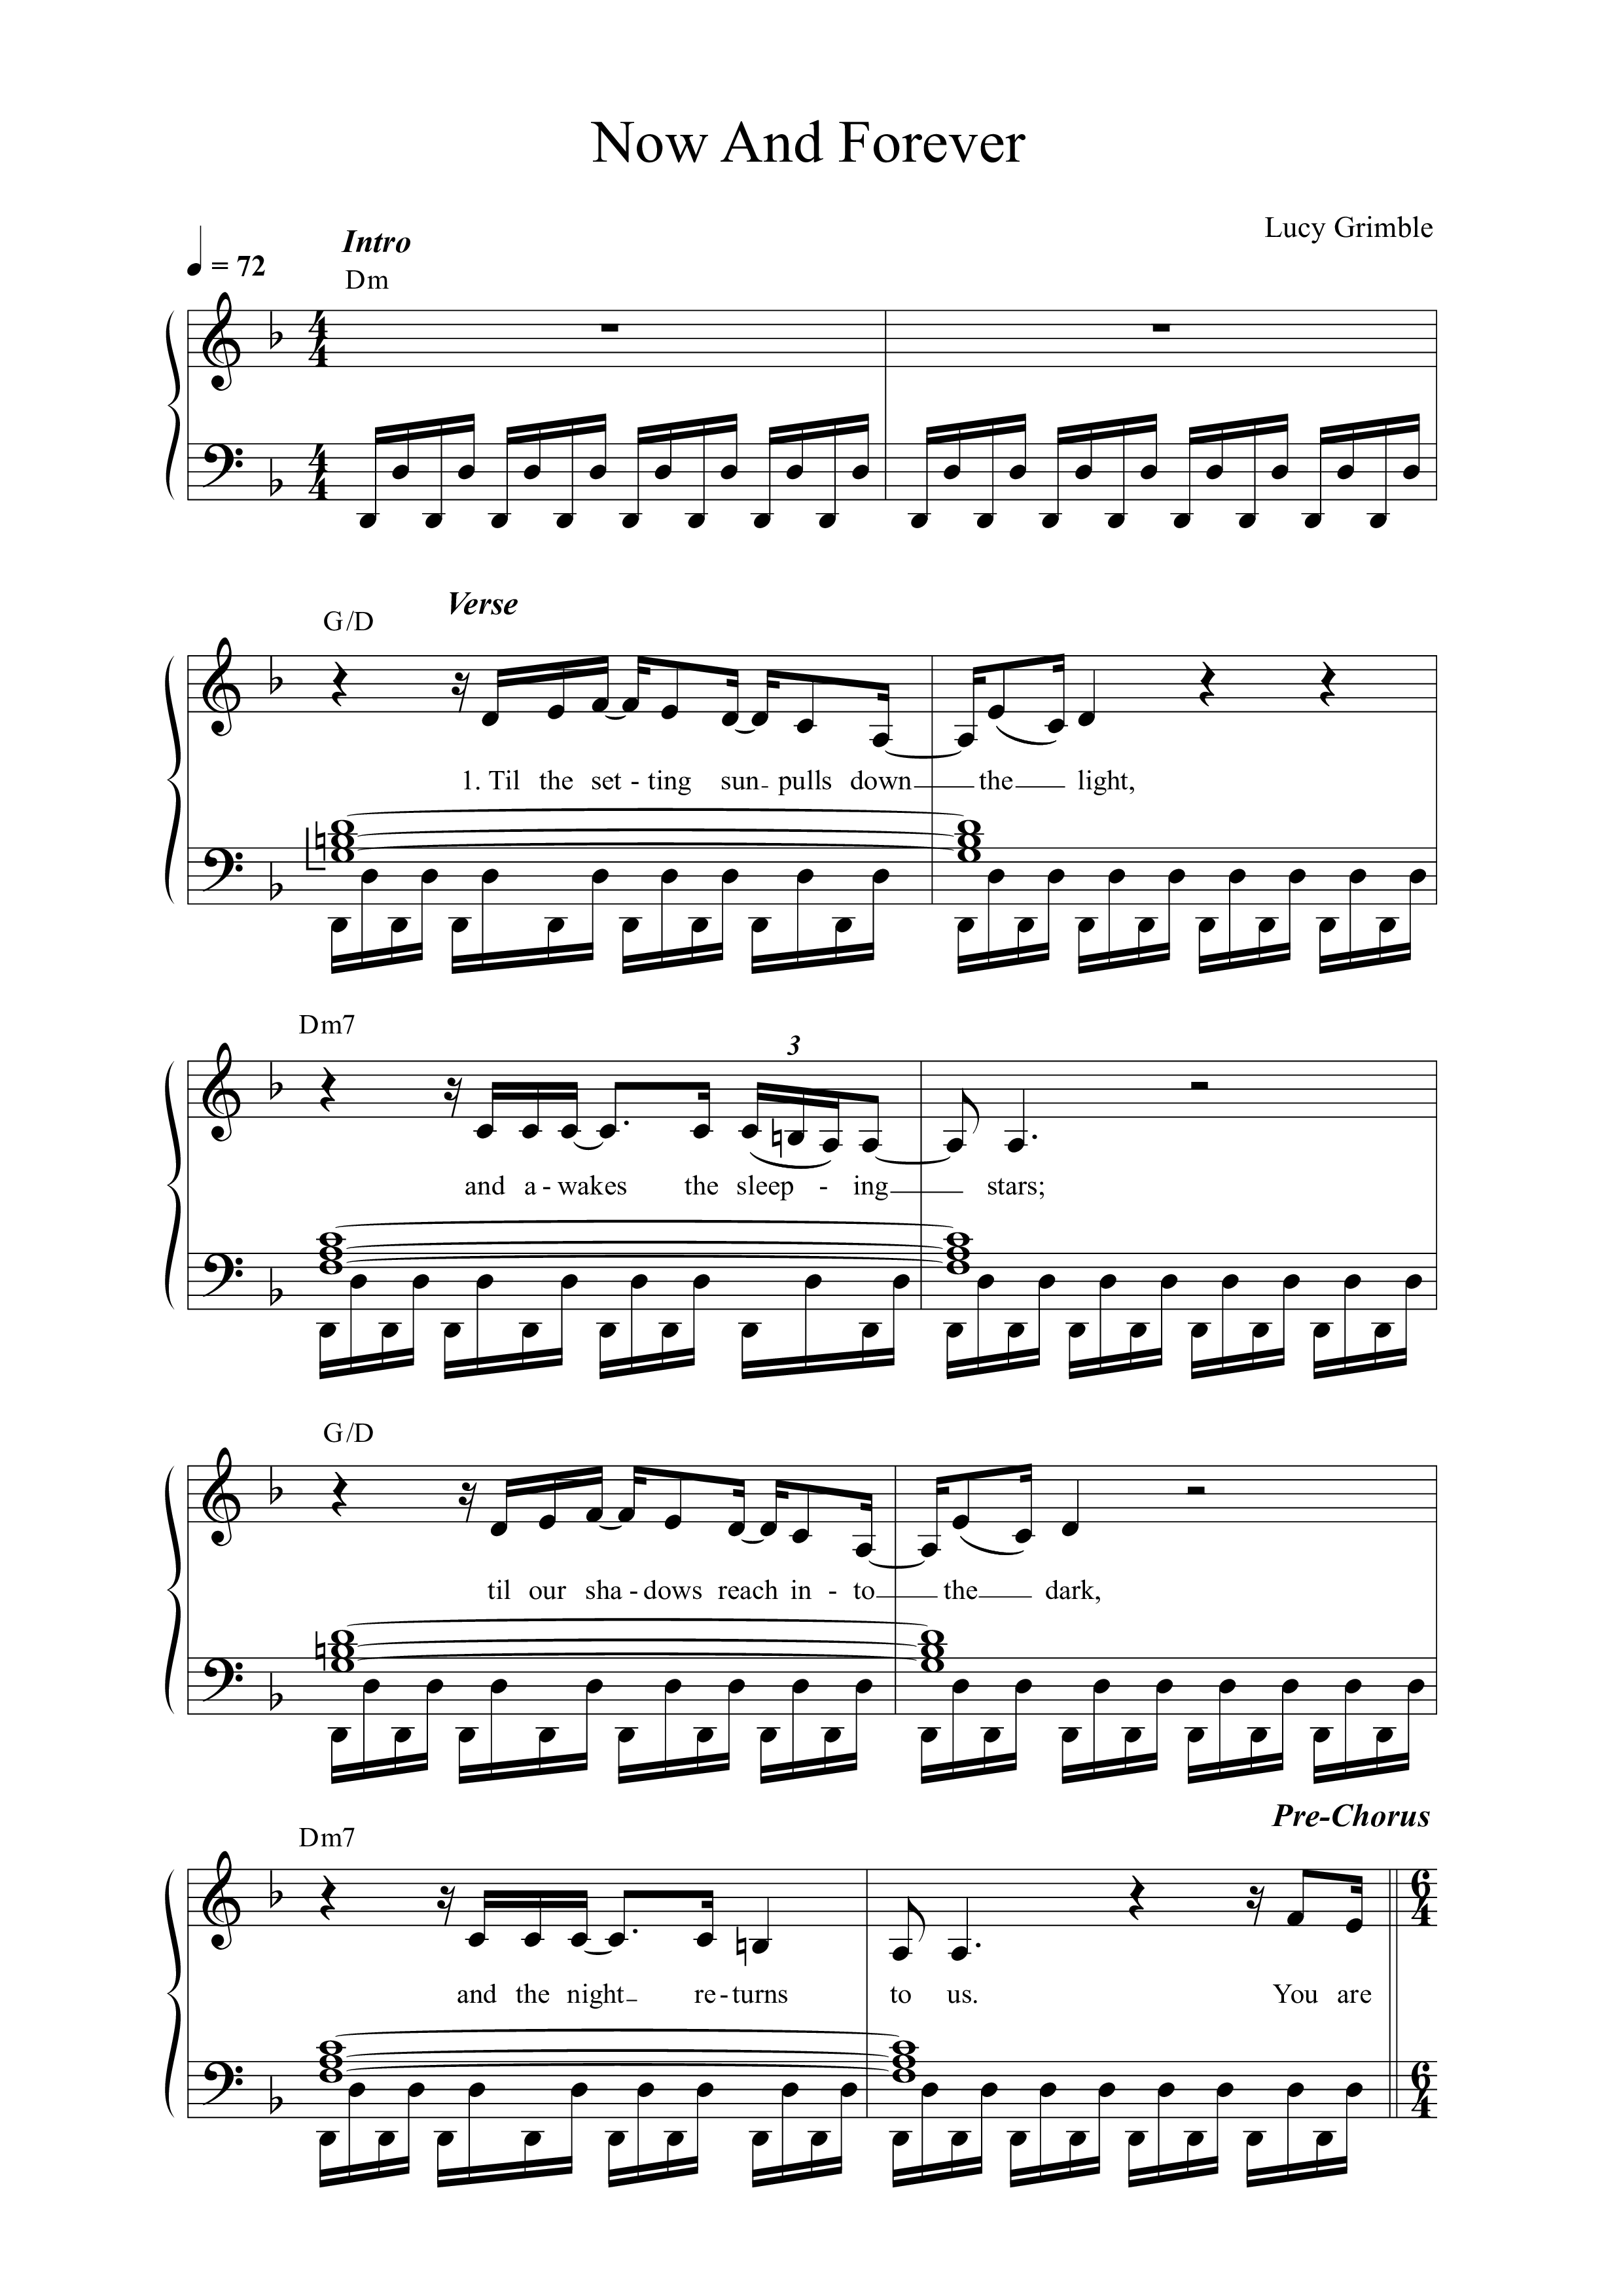 Now And Forever Lead Sheet Melody (Lucy Grimble / Wildwood Kin)